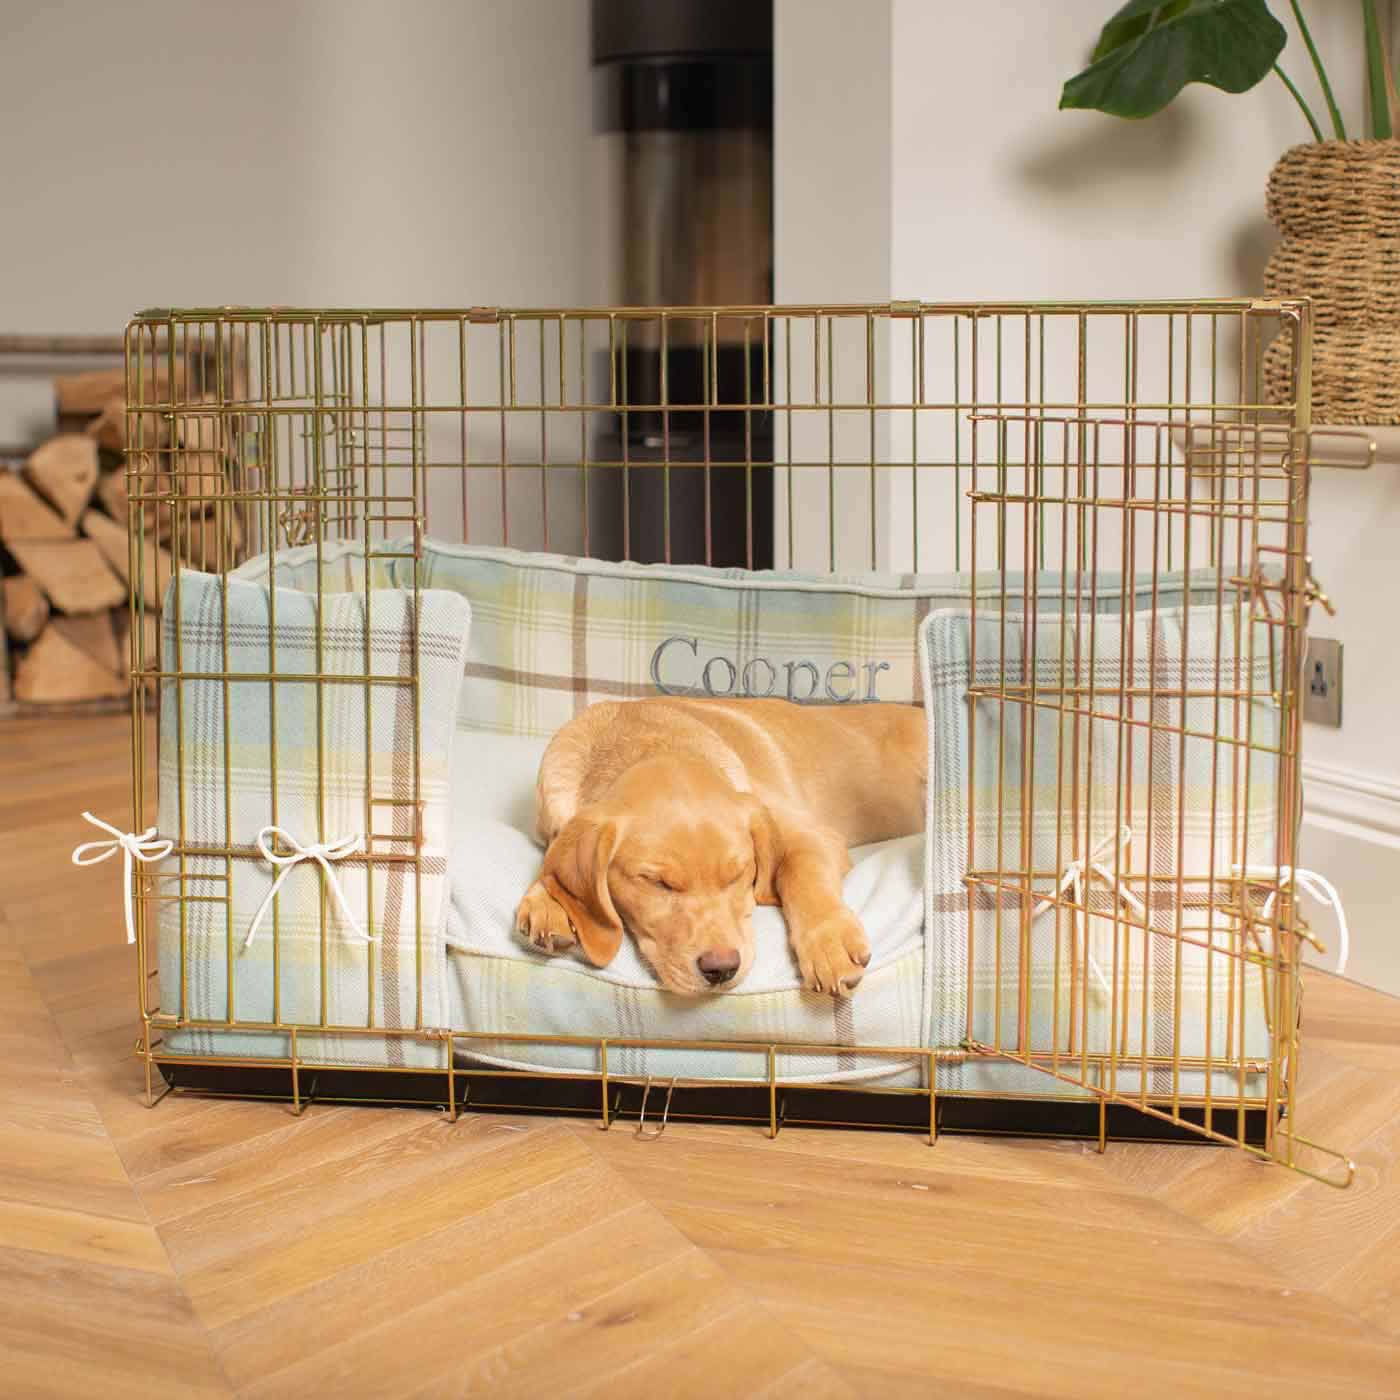 Luxury Dog Crate Bumper, Balmoral Duck Egg Crate Bumper Cover The Perfect Dog Crate Accessory, Available To Personalise Now at Lords & Labradors